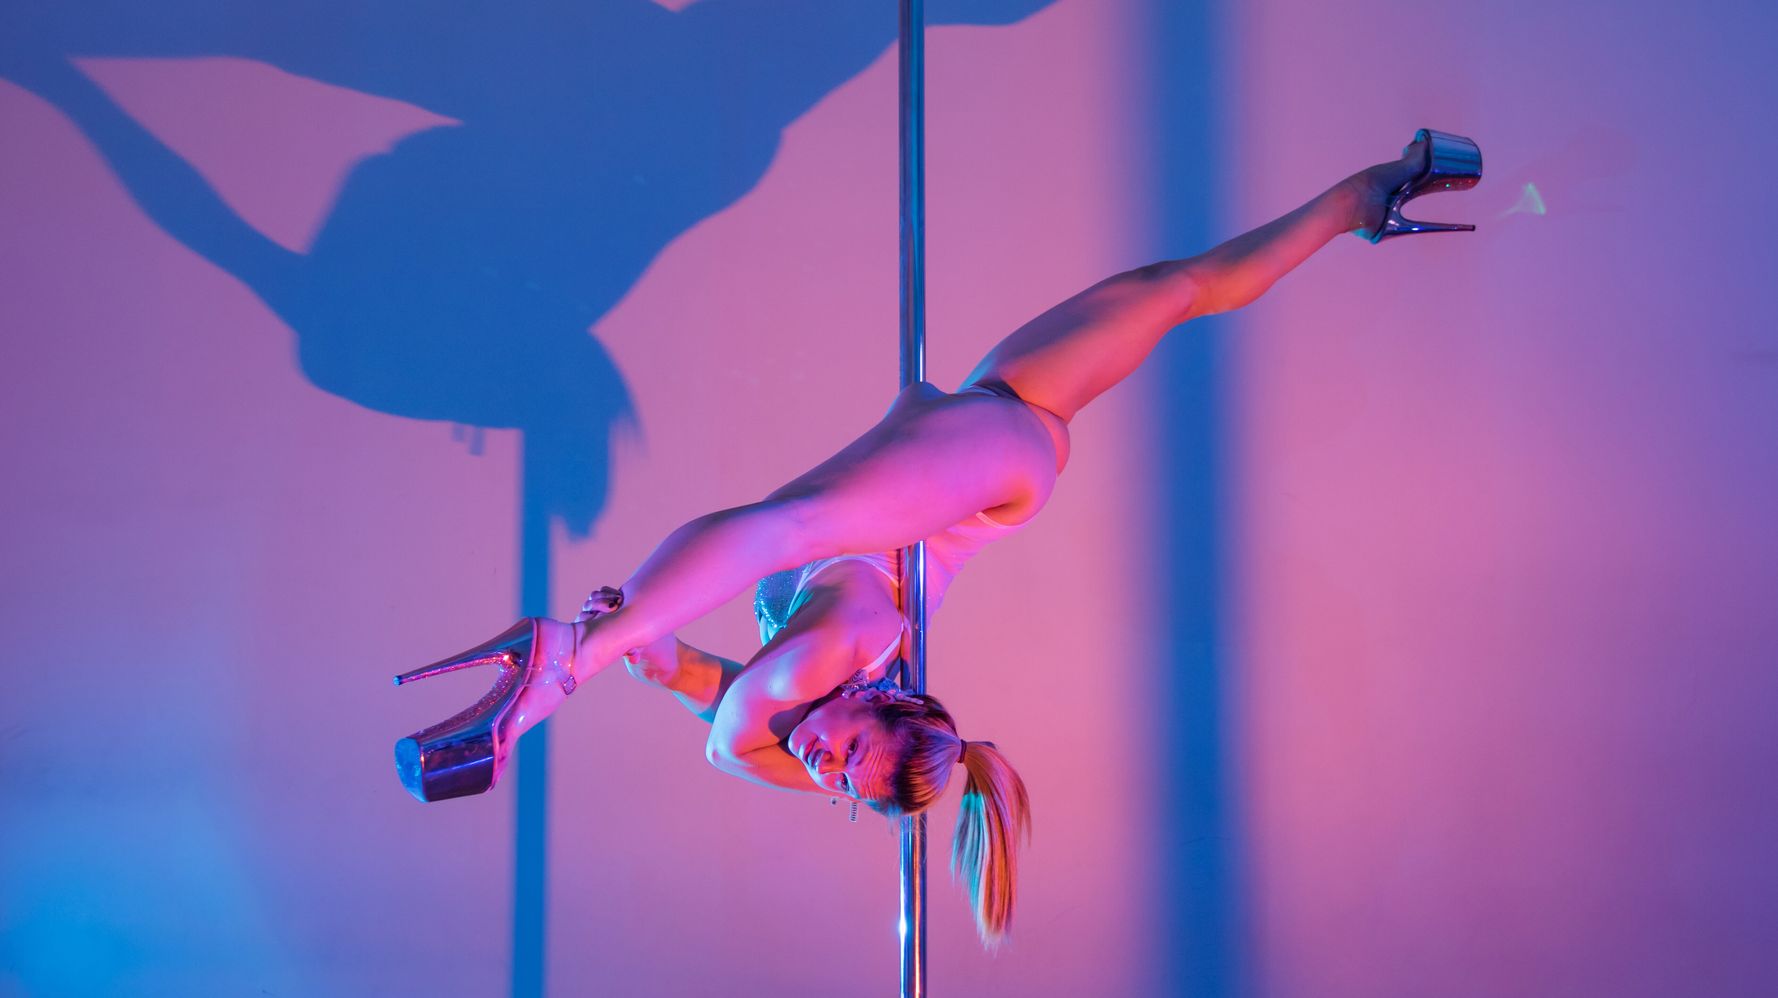 Dance Pole - When I Was Outed For My Porn Past, Pole Dancing Helped Me Heal | HuffPost